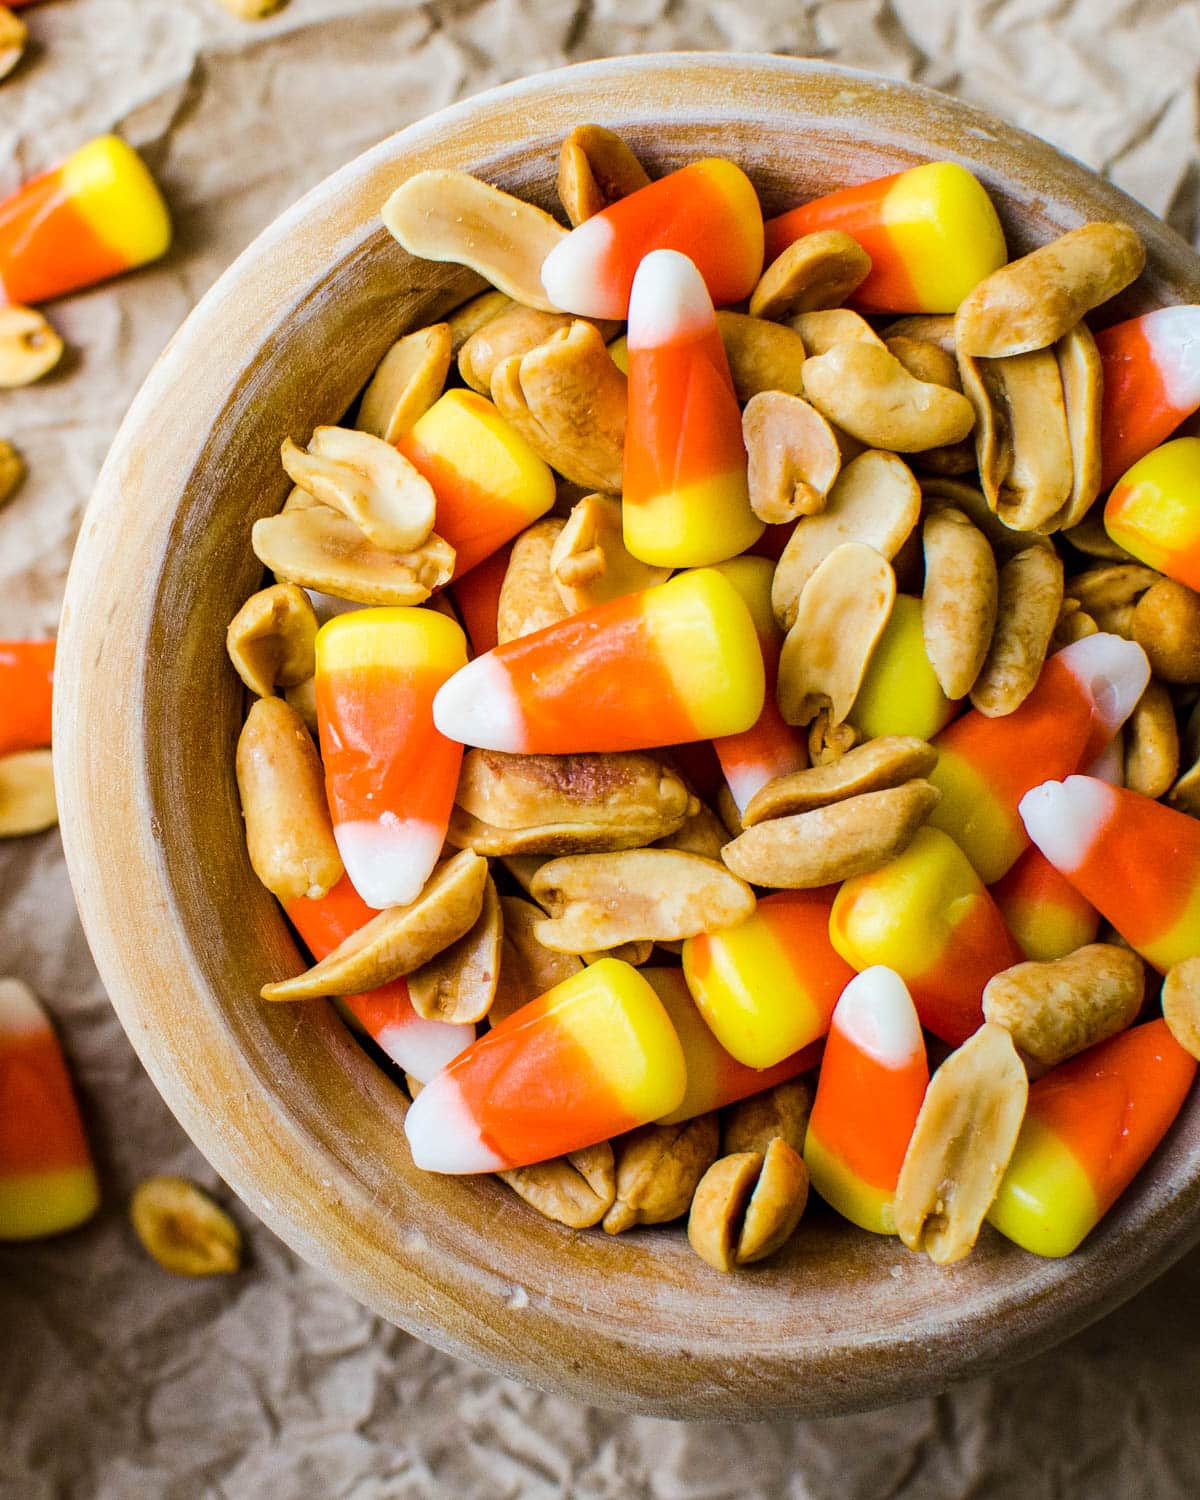 Candy corn and peanut snack mix in a wooden bowl.